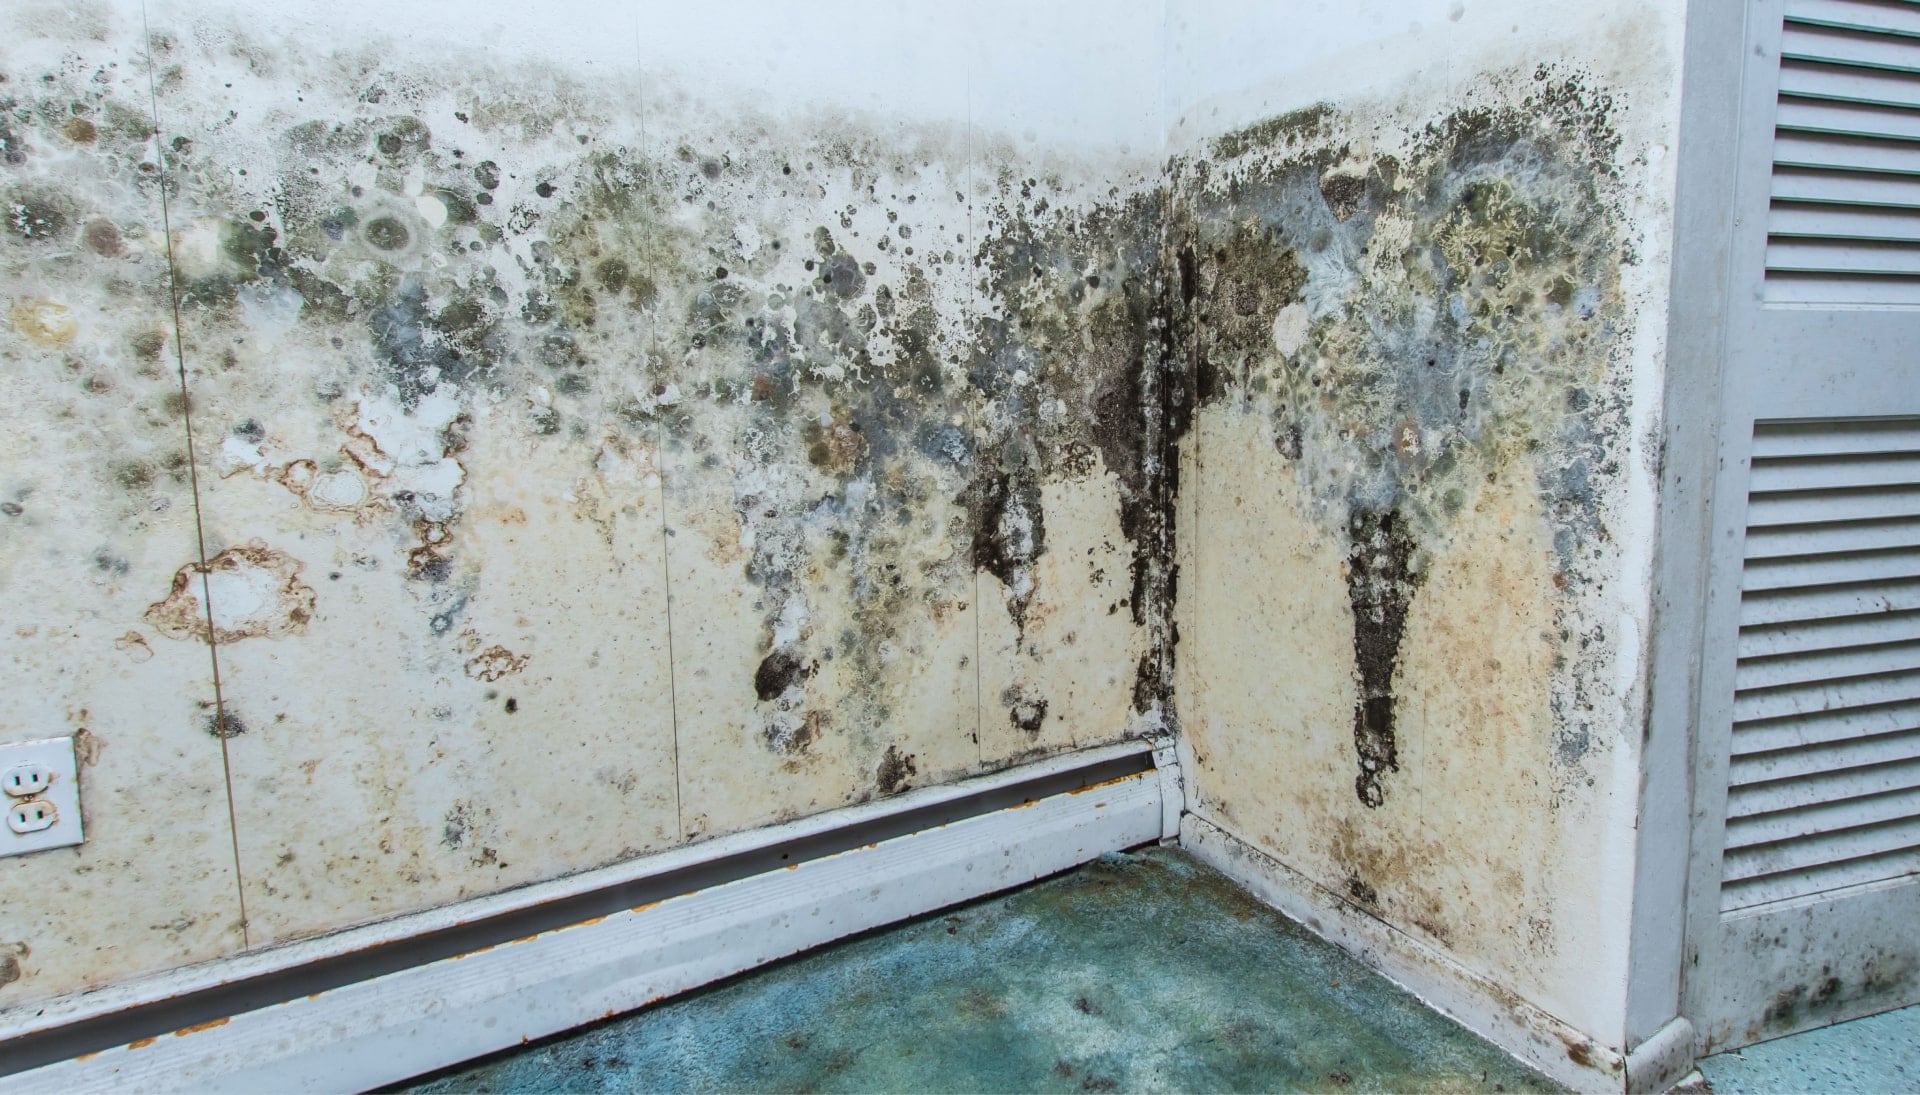 Professional mold removal, odor control, and water damage restoration service in Columbus, Ohio.